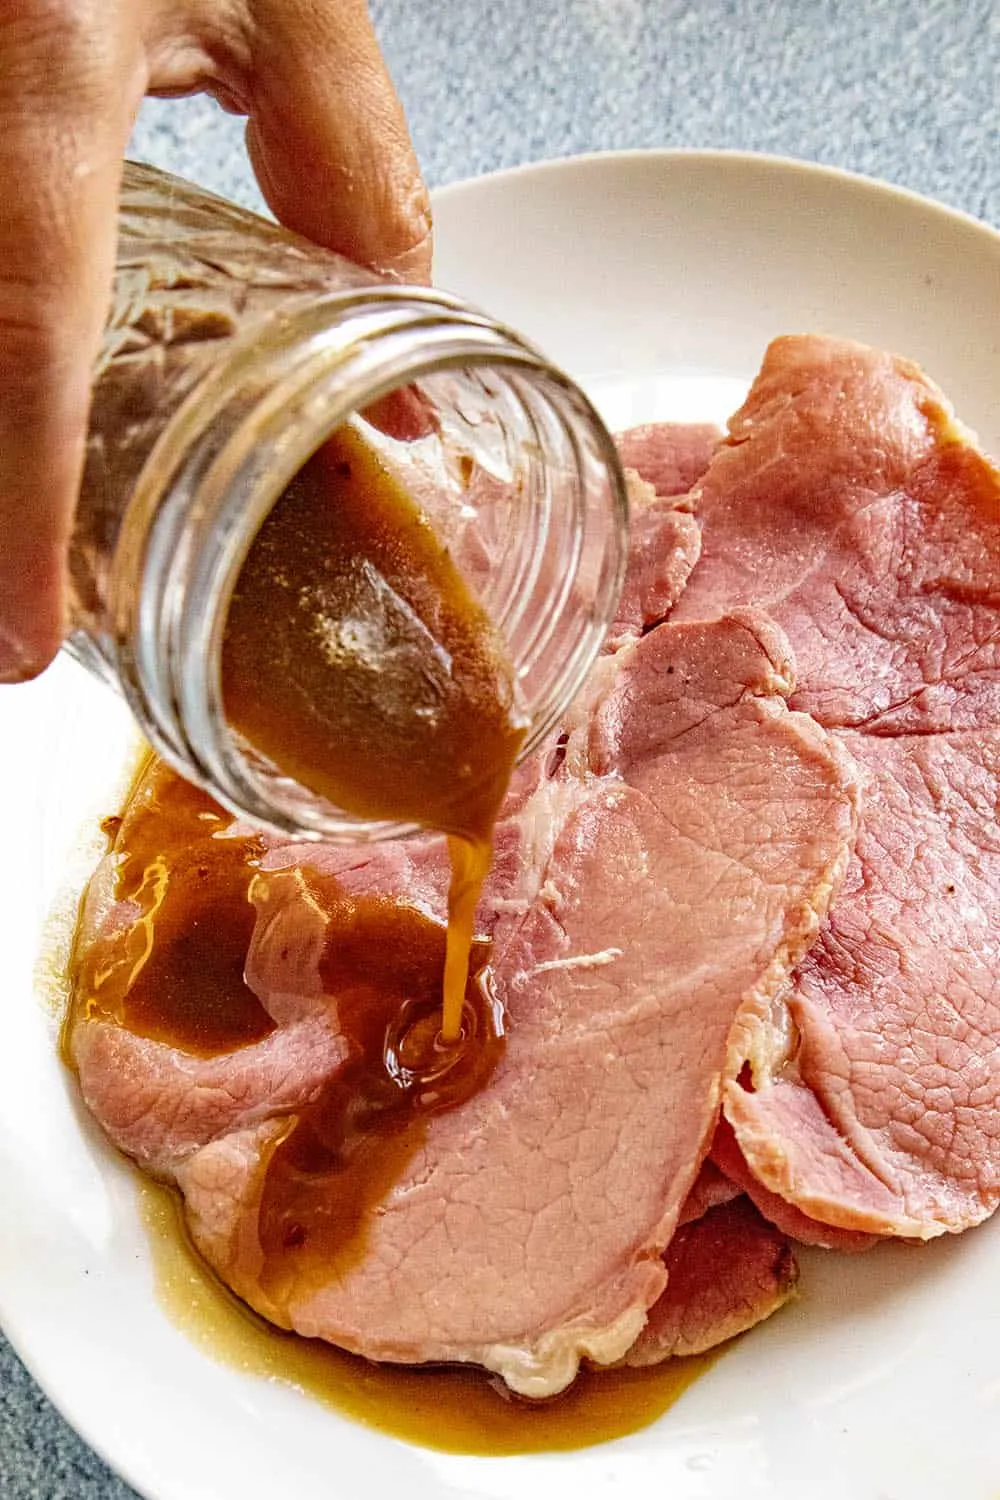 Pouring Red Eye Gravy over slices of country ham